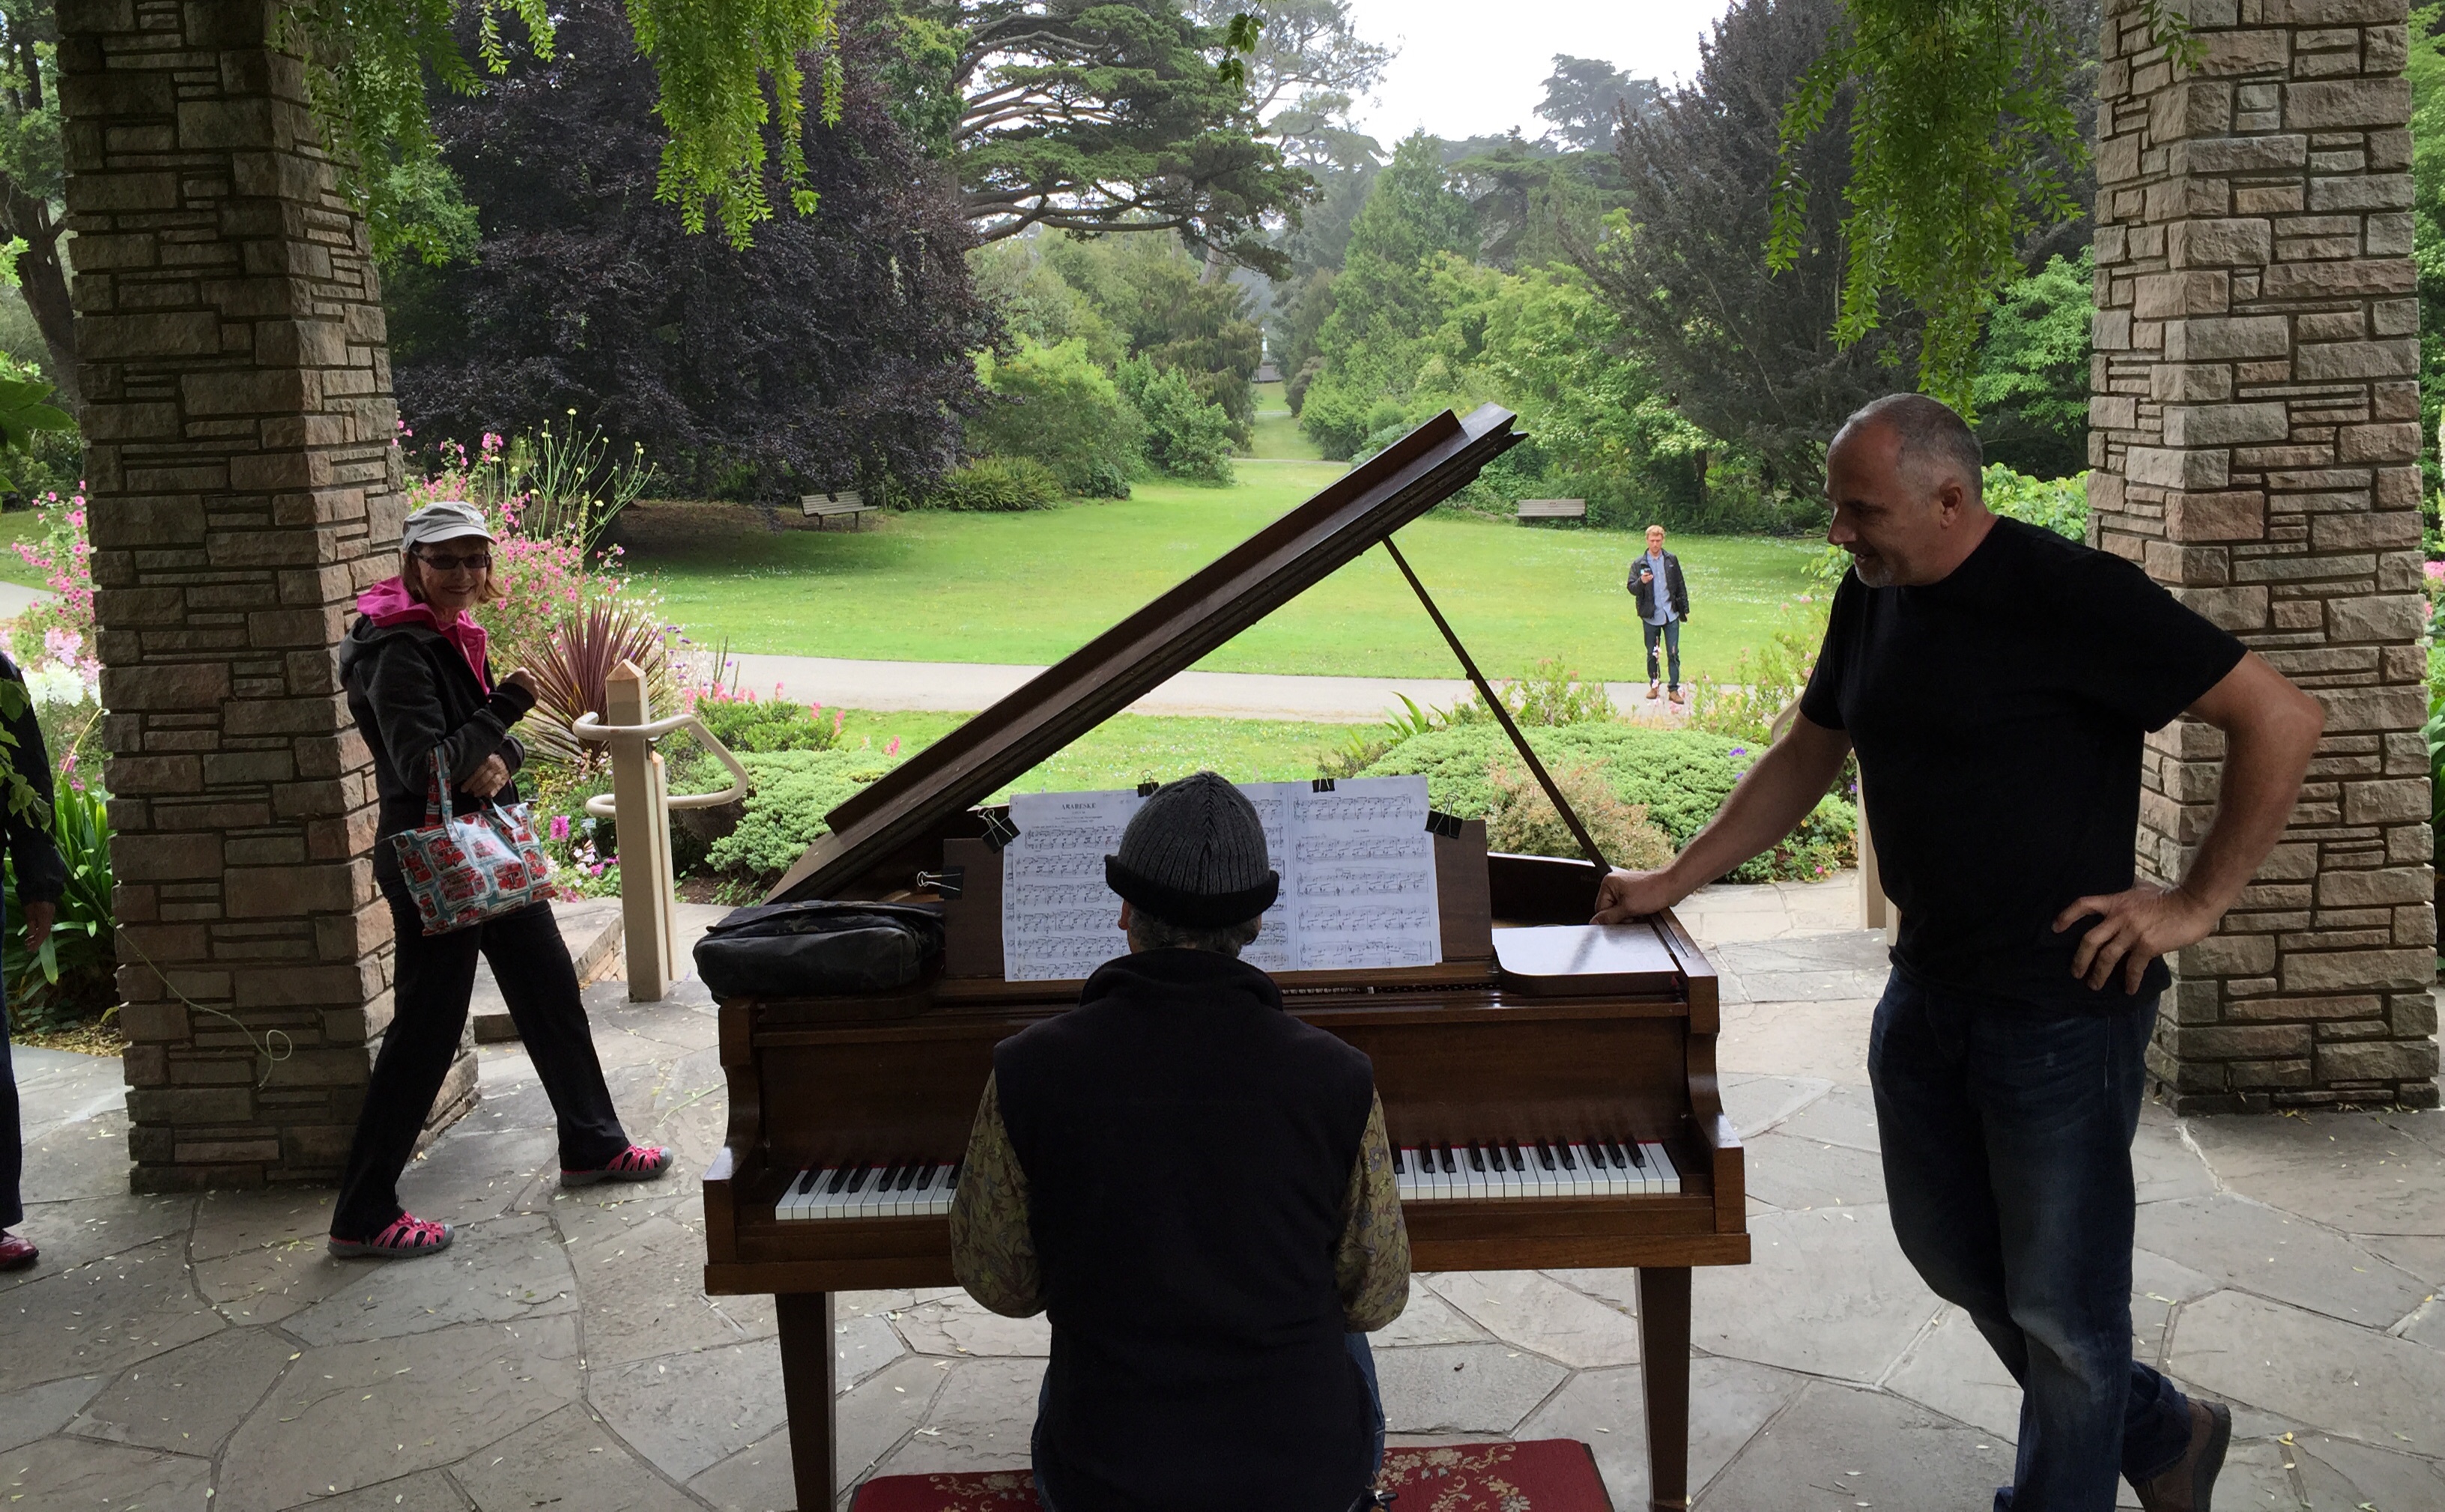 come play a piano in the san francisco botanical gardens | kqed arts